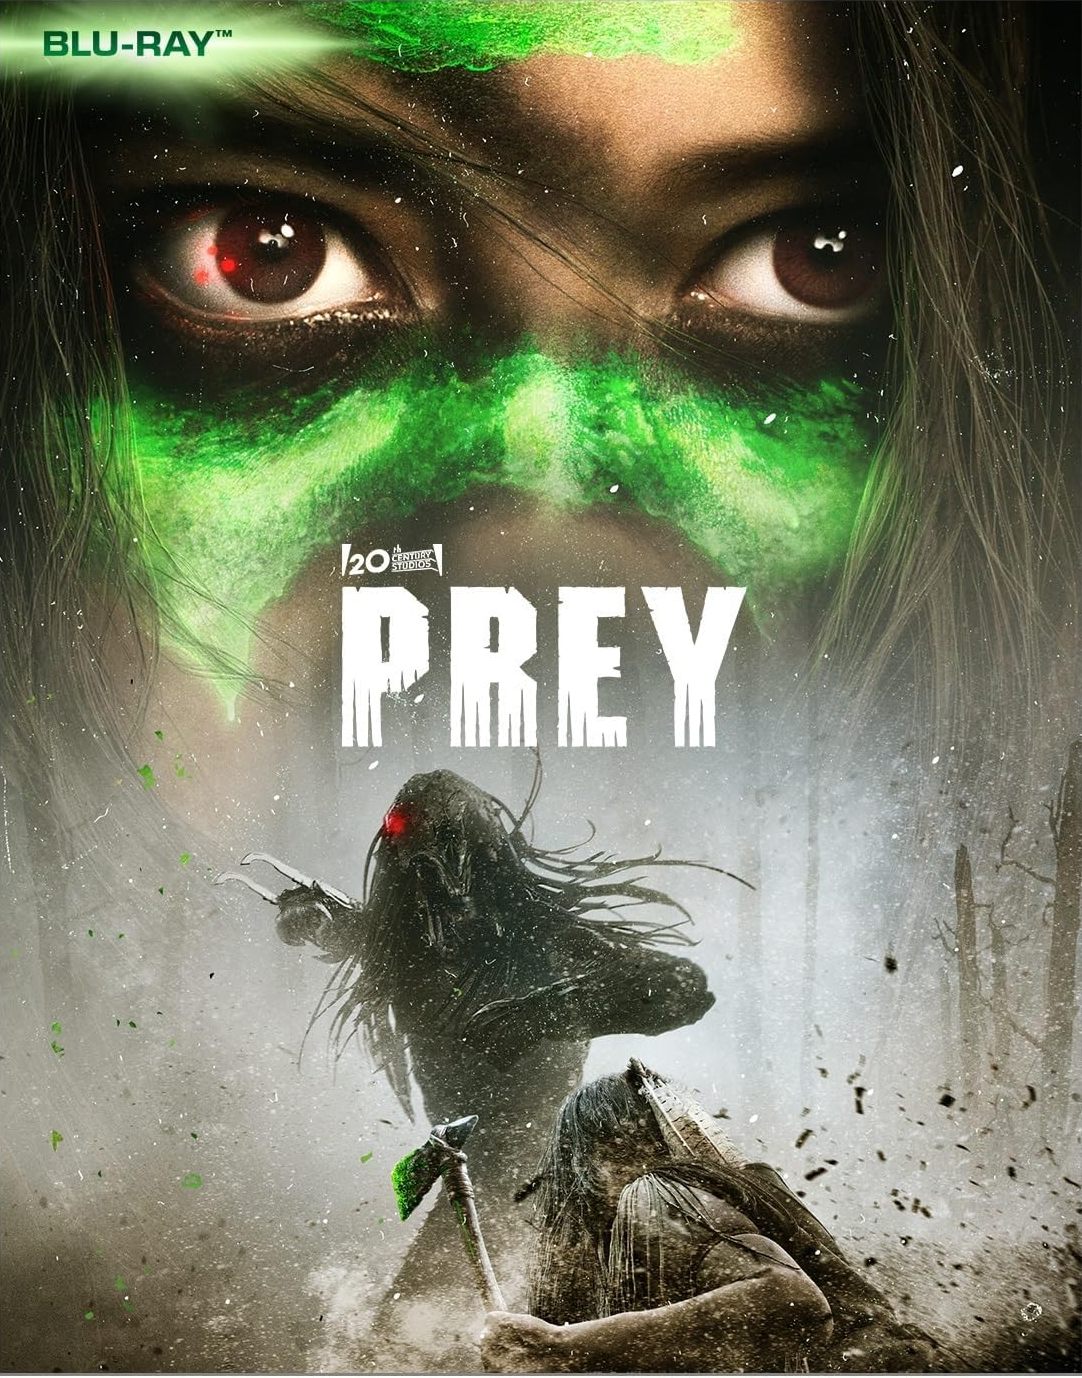 It's Official! Prey is Getting Home Release! DVD, Blu-ray and 4K Announced  - Alien vs. Predator Galaxy